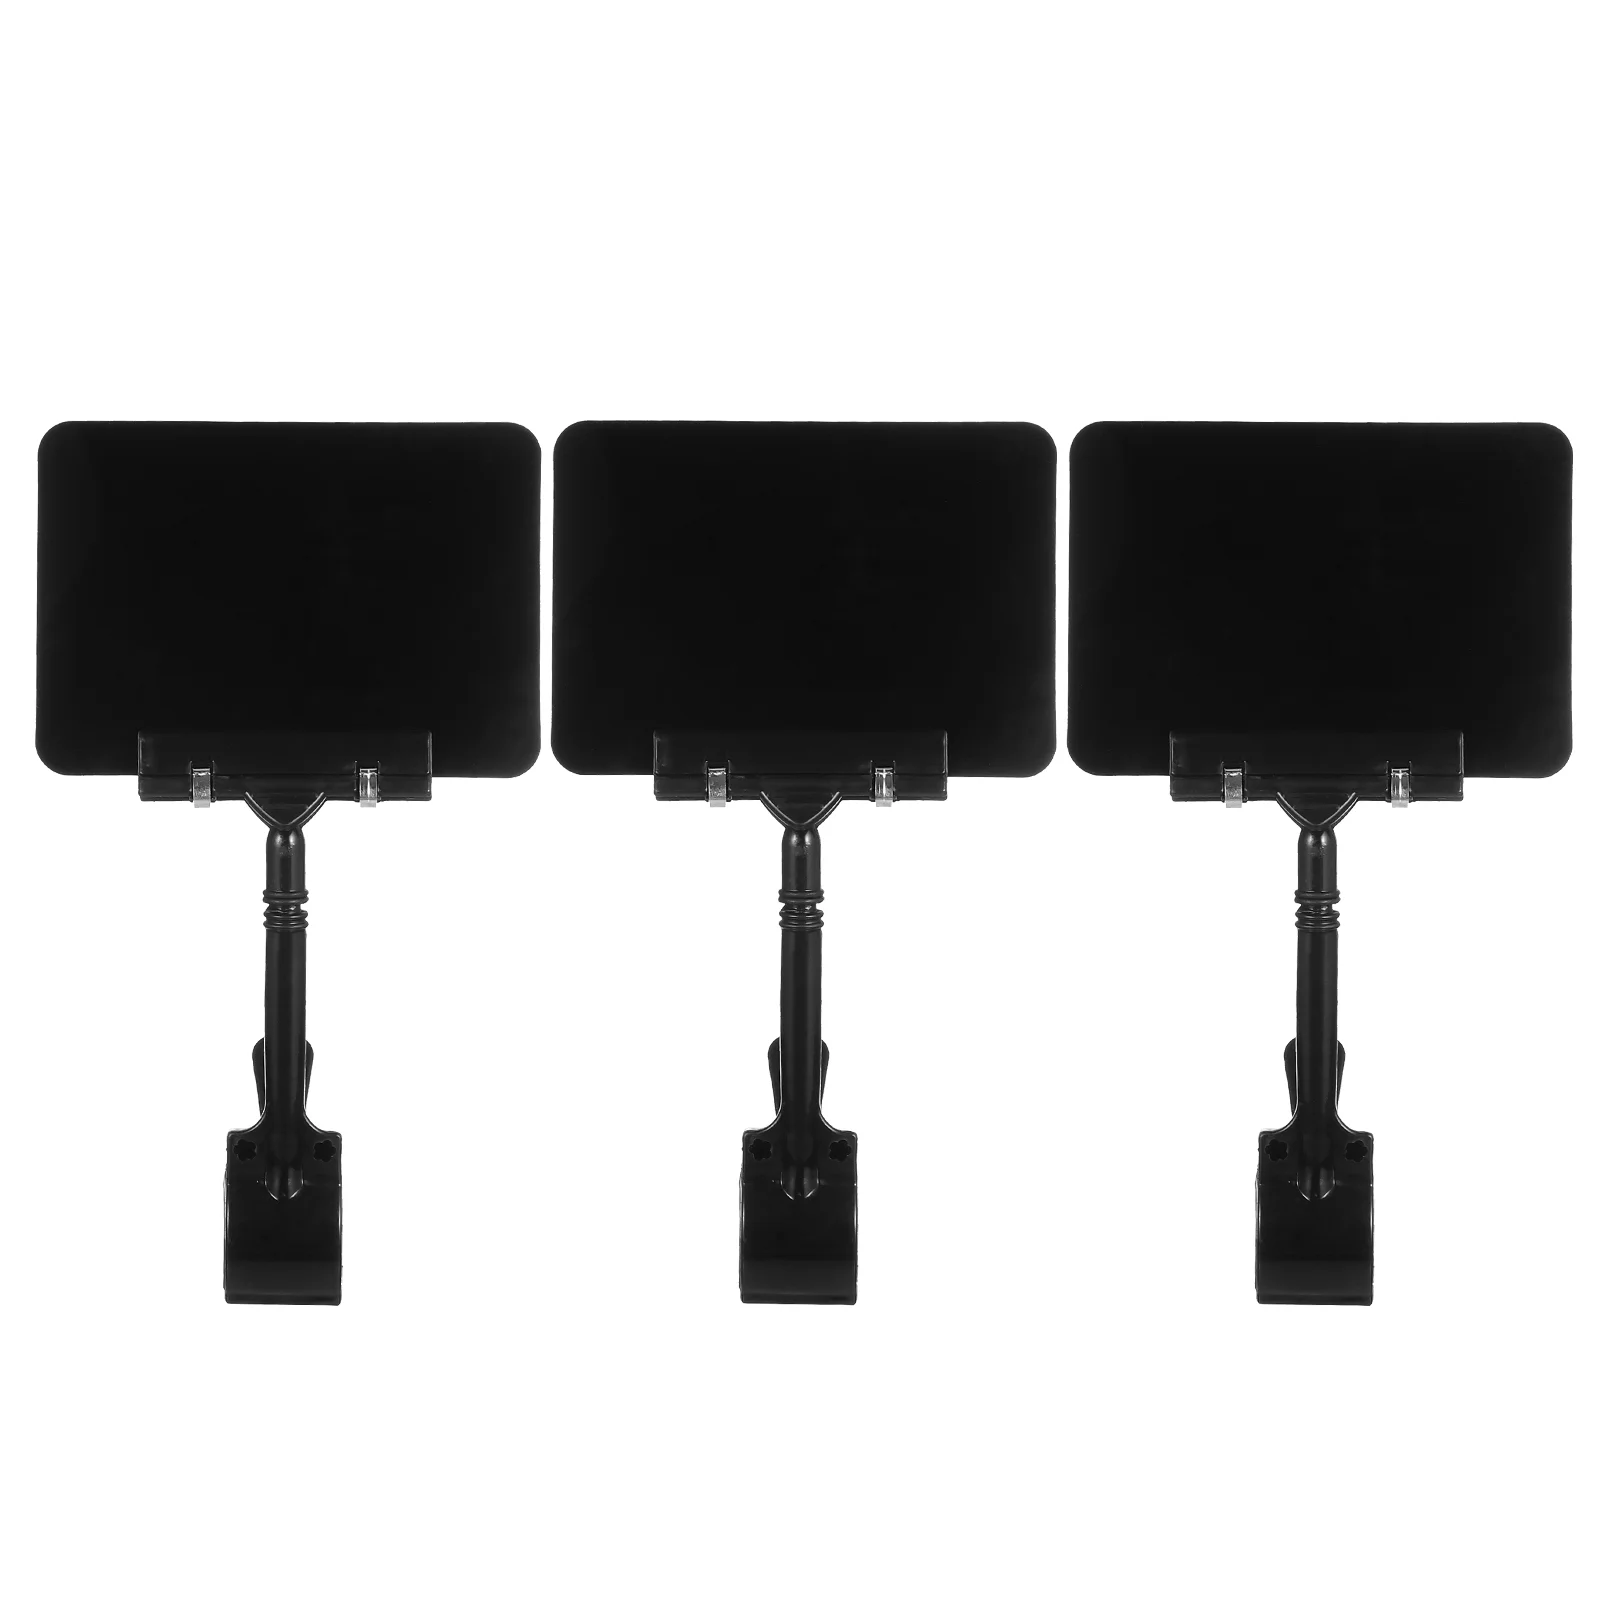 

3PCS Chalkboard Clips Merchandise Sign Display Clip Price Clips Holders Stand Price for Price Note Supermarket Shelf Merchandise